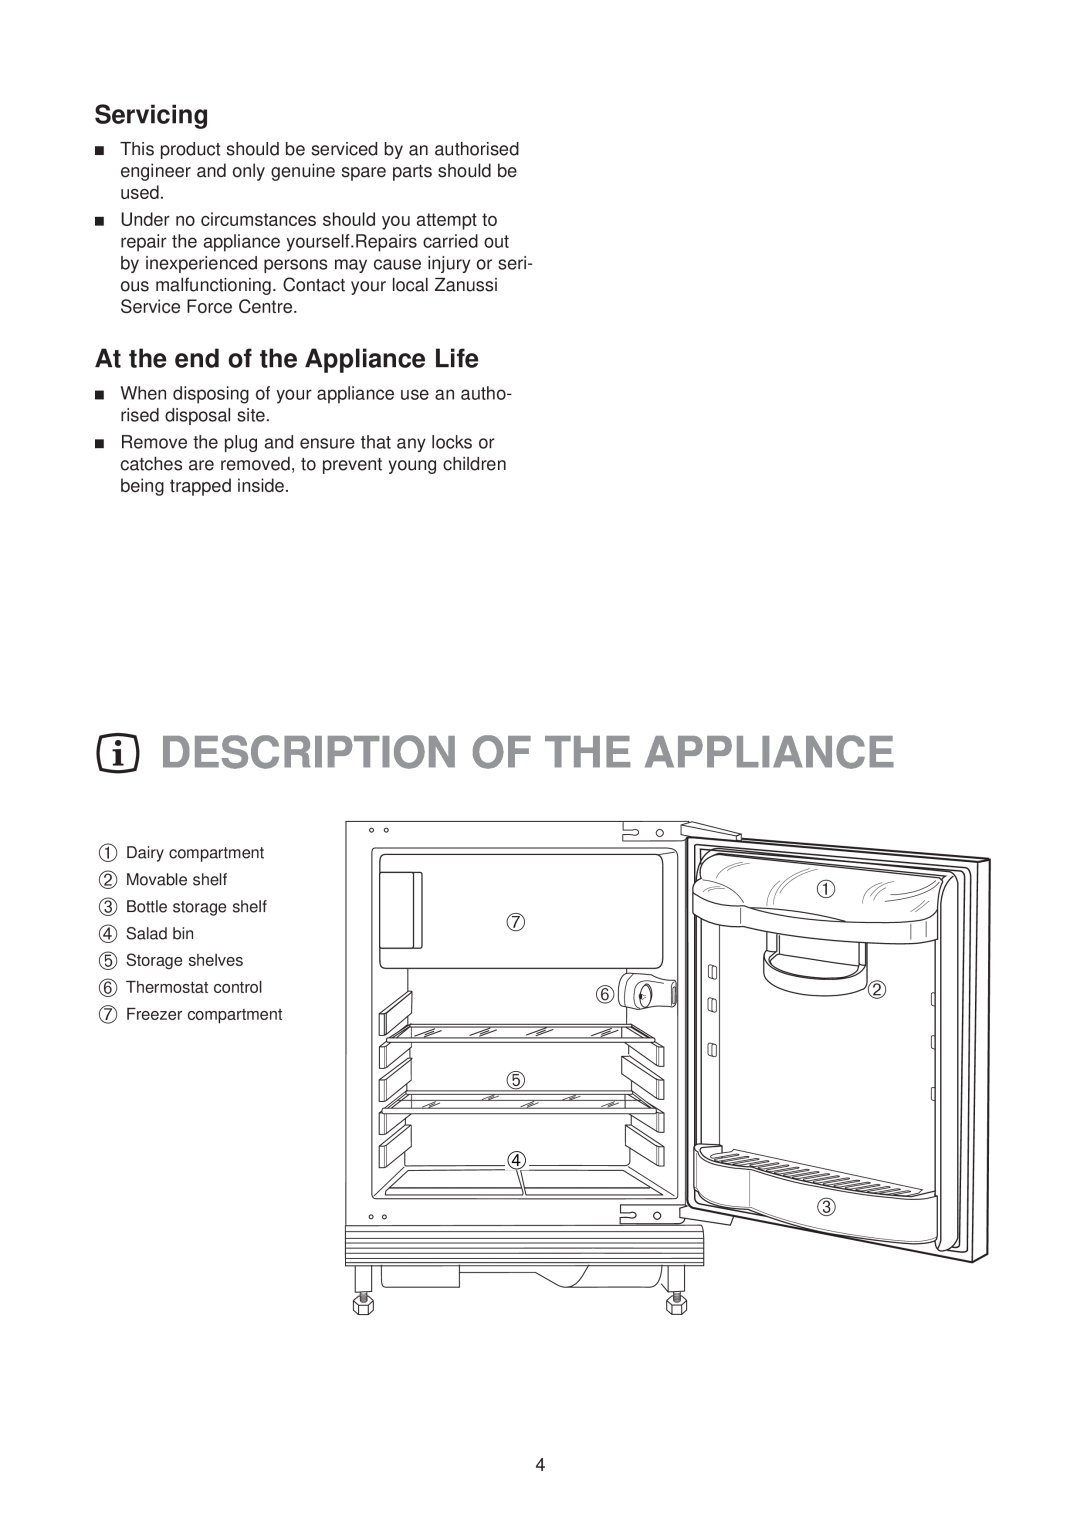 Zanussi ZUD 9124 manual Description Of The Appliance, Servicing, At the end of the Appliance Life, ➆ ➅ ➄ ➃, ➀ ➁ ➂ 